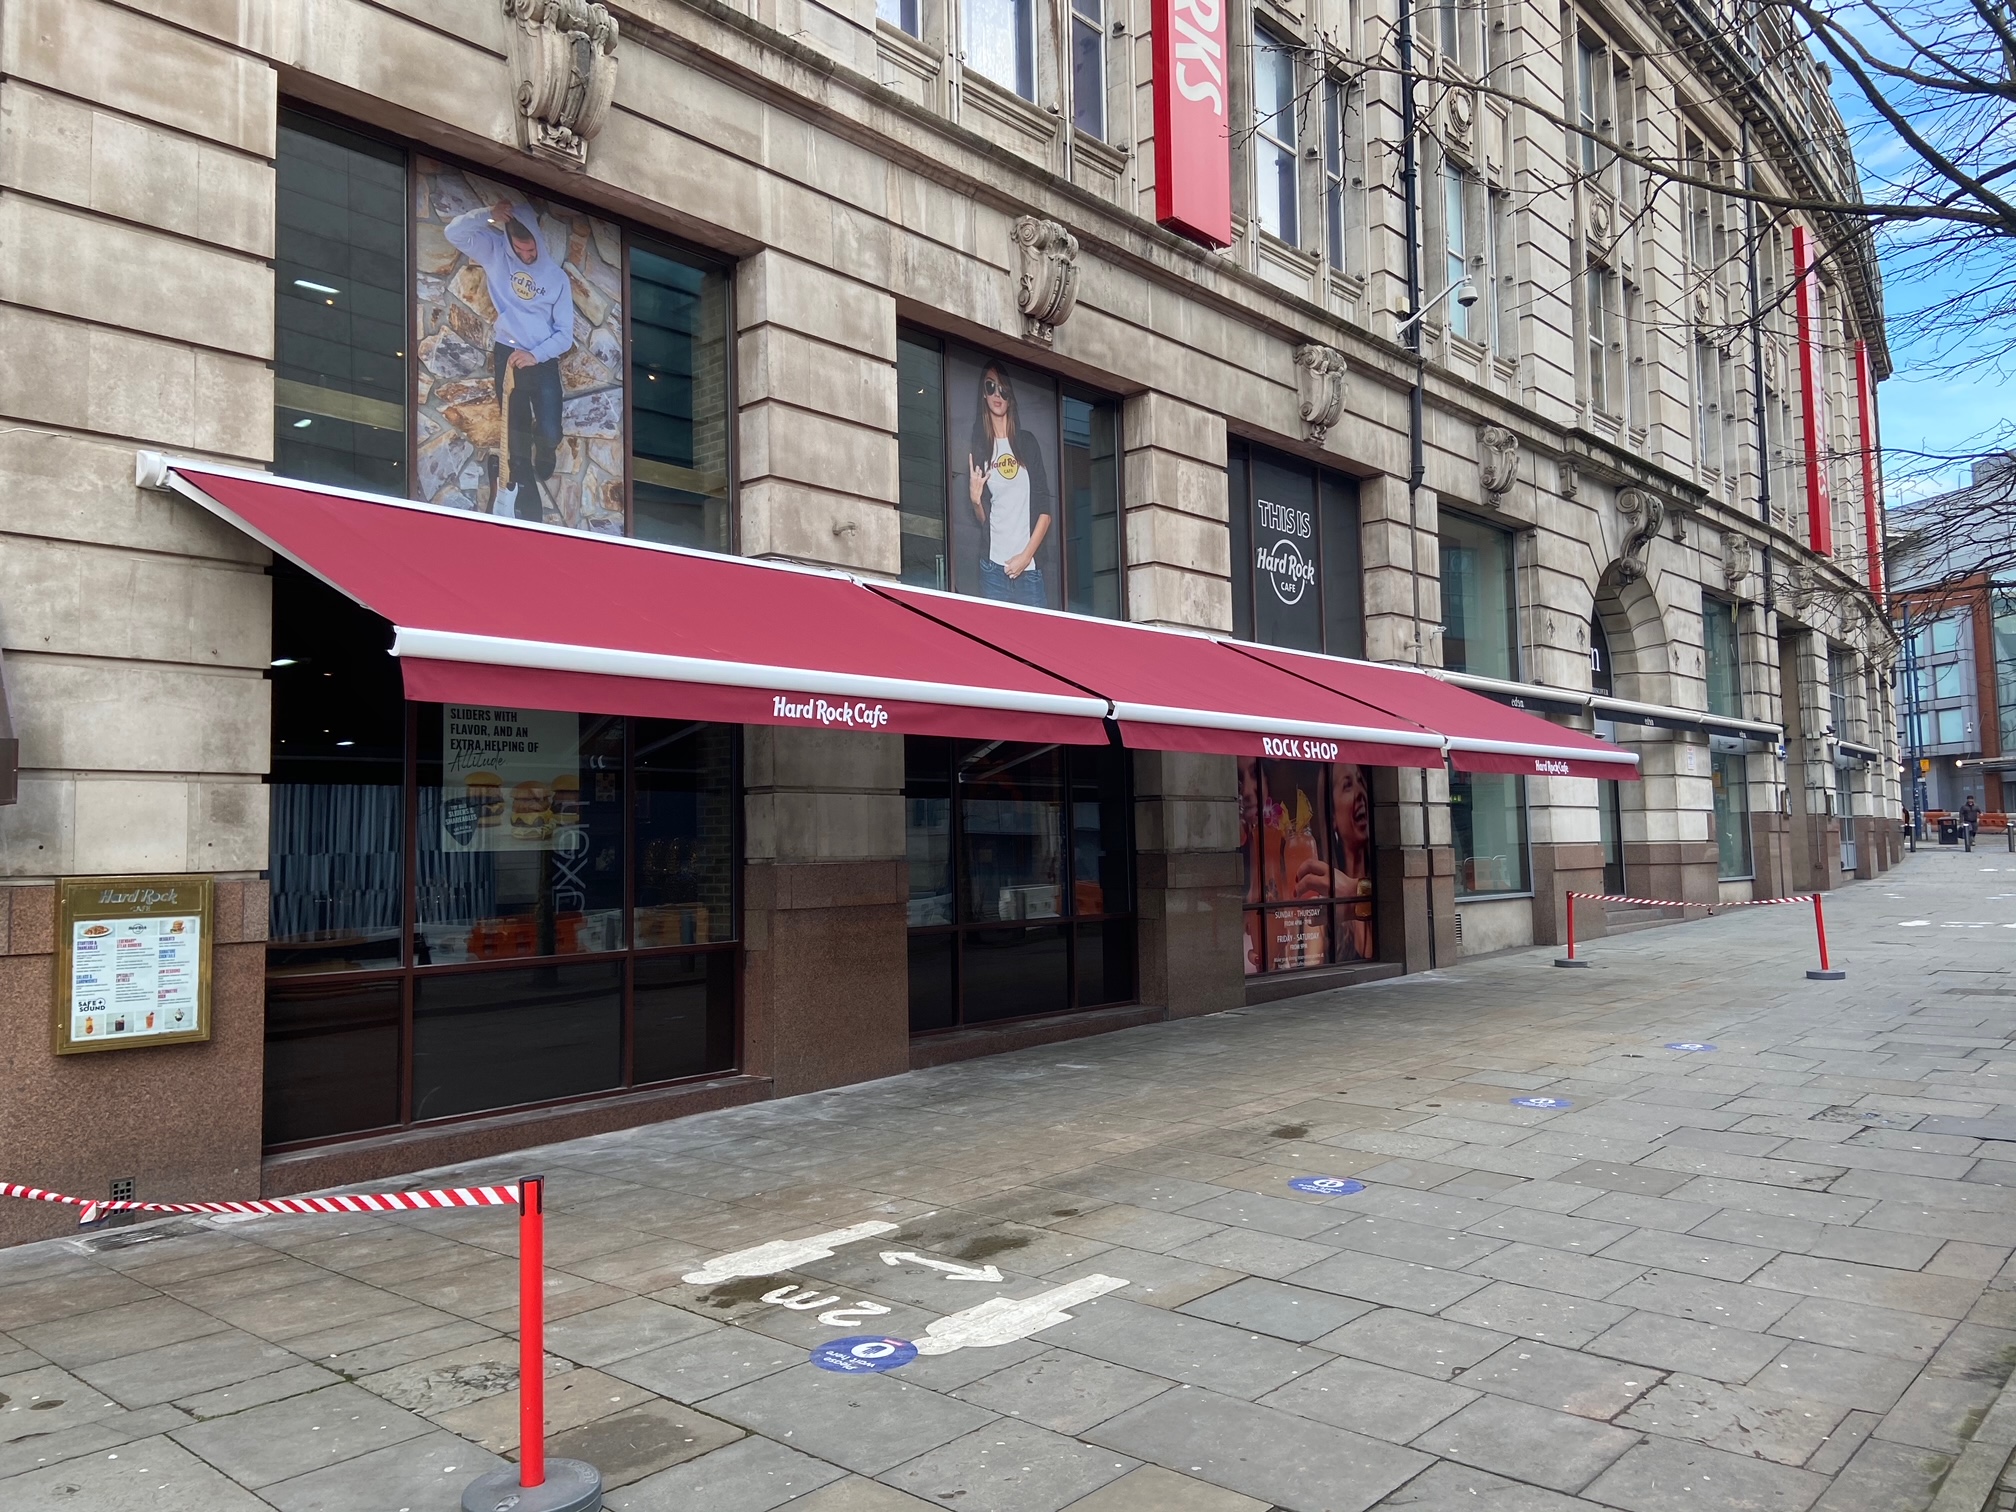 Hard Rock Cafe Awnings - Manchester